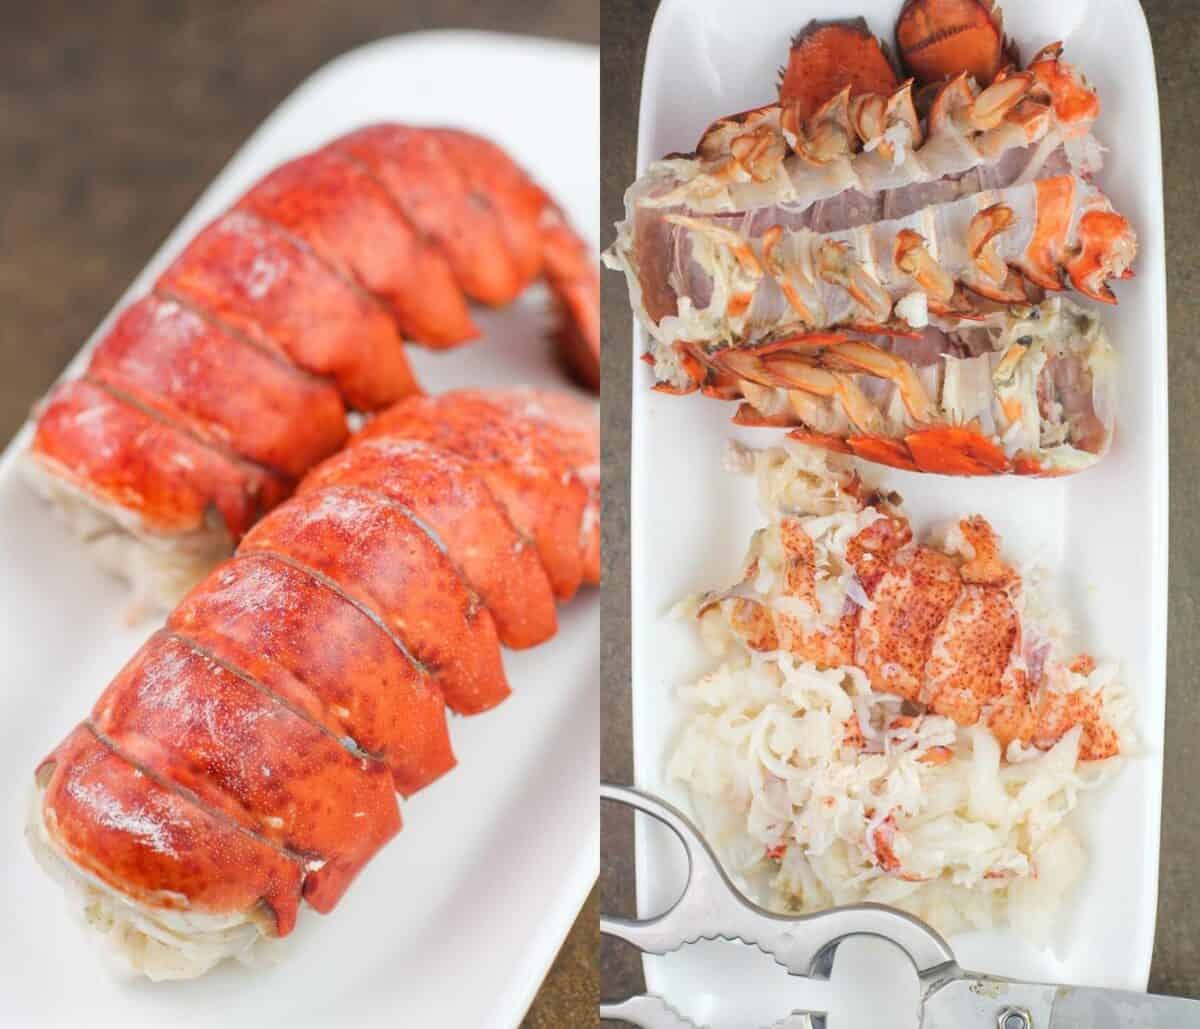 collage of 2 photos: left, cooked lobster tails, right, scissors, empty shells, and meat from lobster tails on white plate